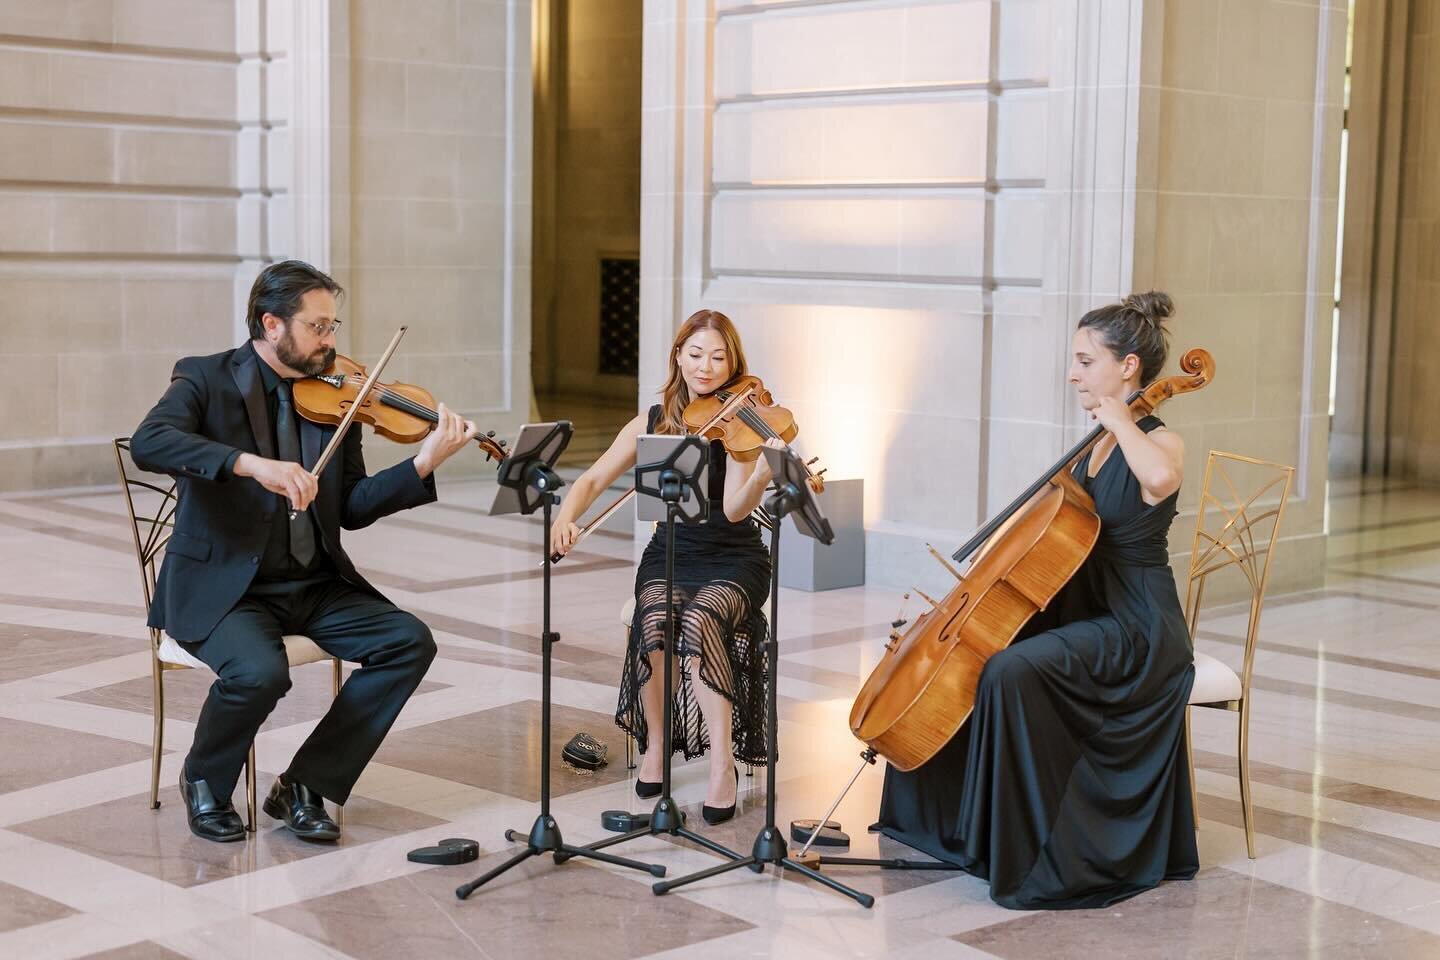 Infusing an elegant ambiance into a timeless San Francisco City Hall union.
.
.
@theganeys @daldevents 
.
.
.
#timeless #elegant #sfcityhall #marriage #union #wedding #violin #viola #cello #stringtrio #music t